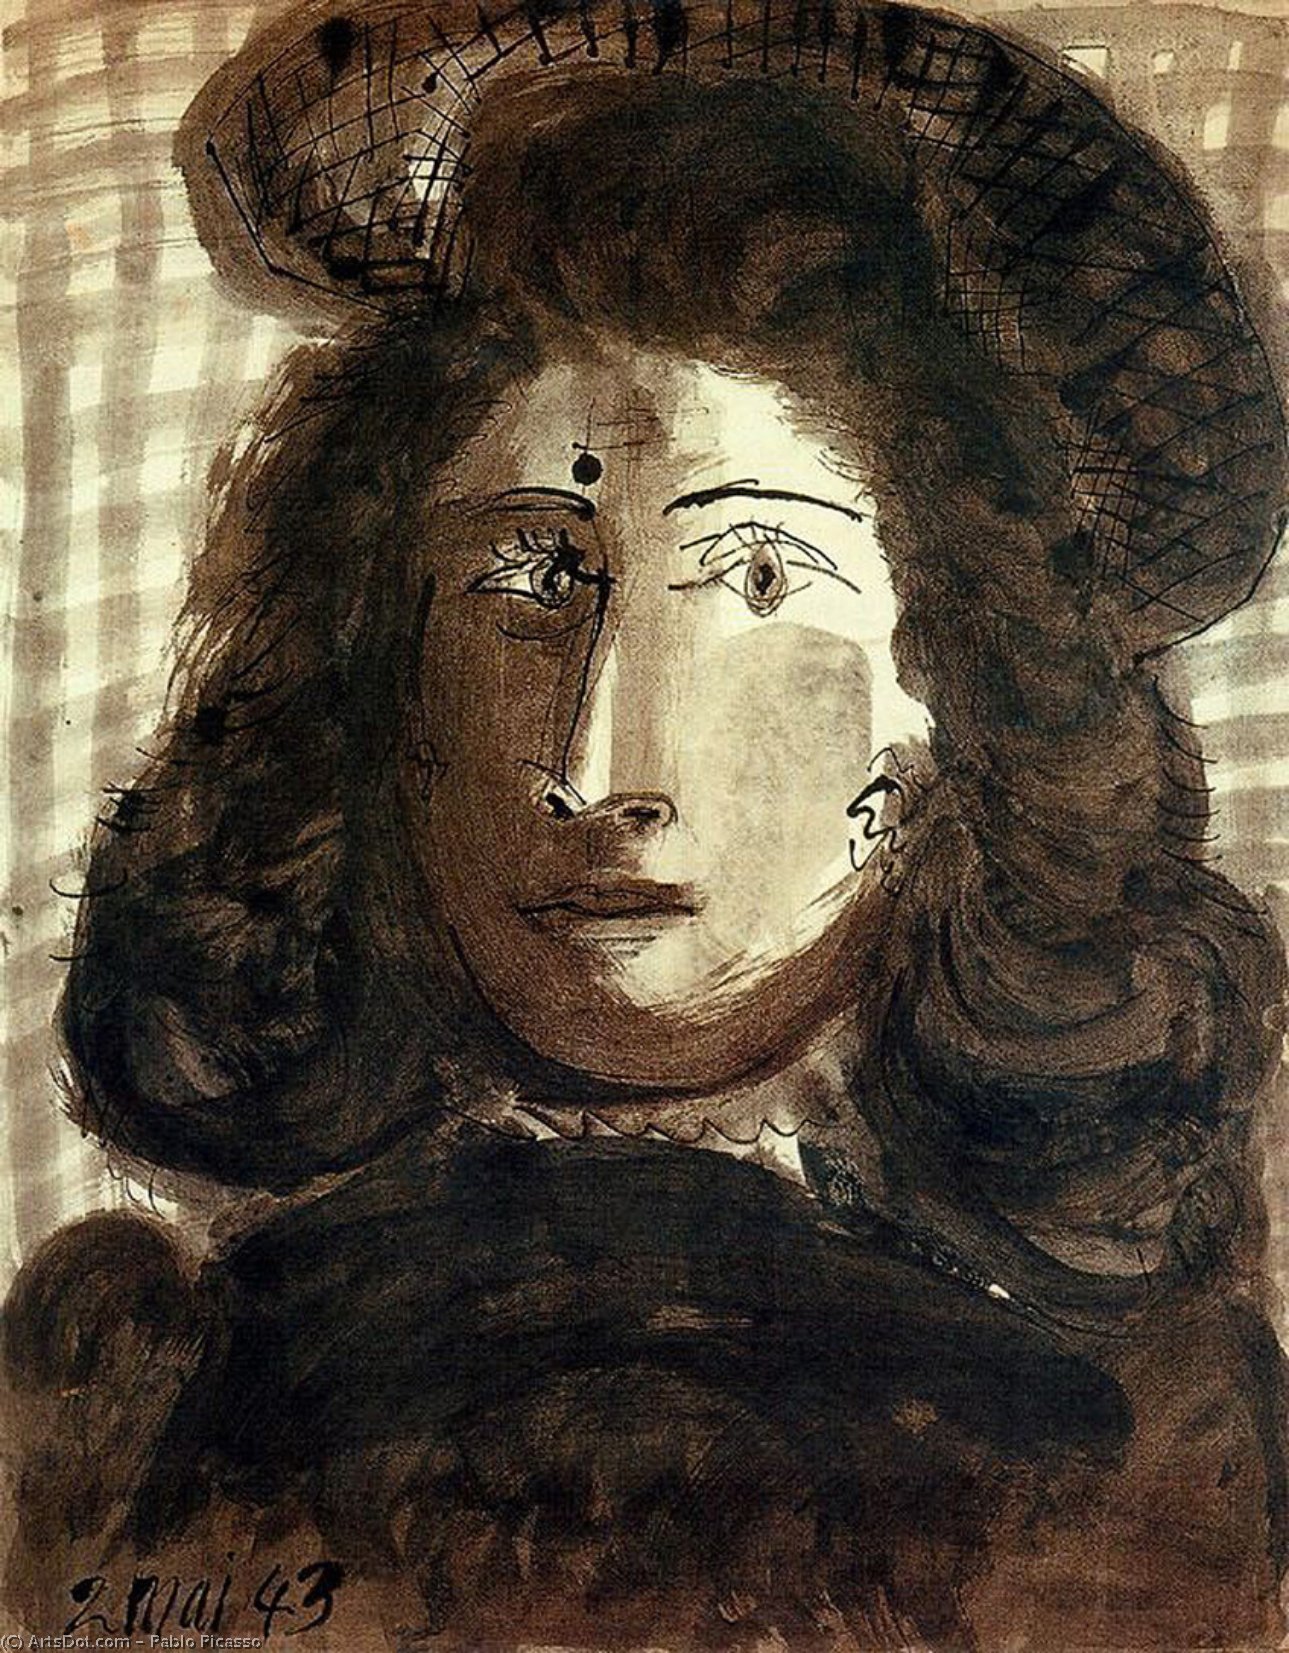 WikiOO.org - Encyclopedia of Fine Arts - Malba, Artwork Pablo Picasso - Woman with hat